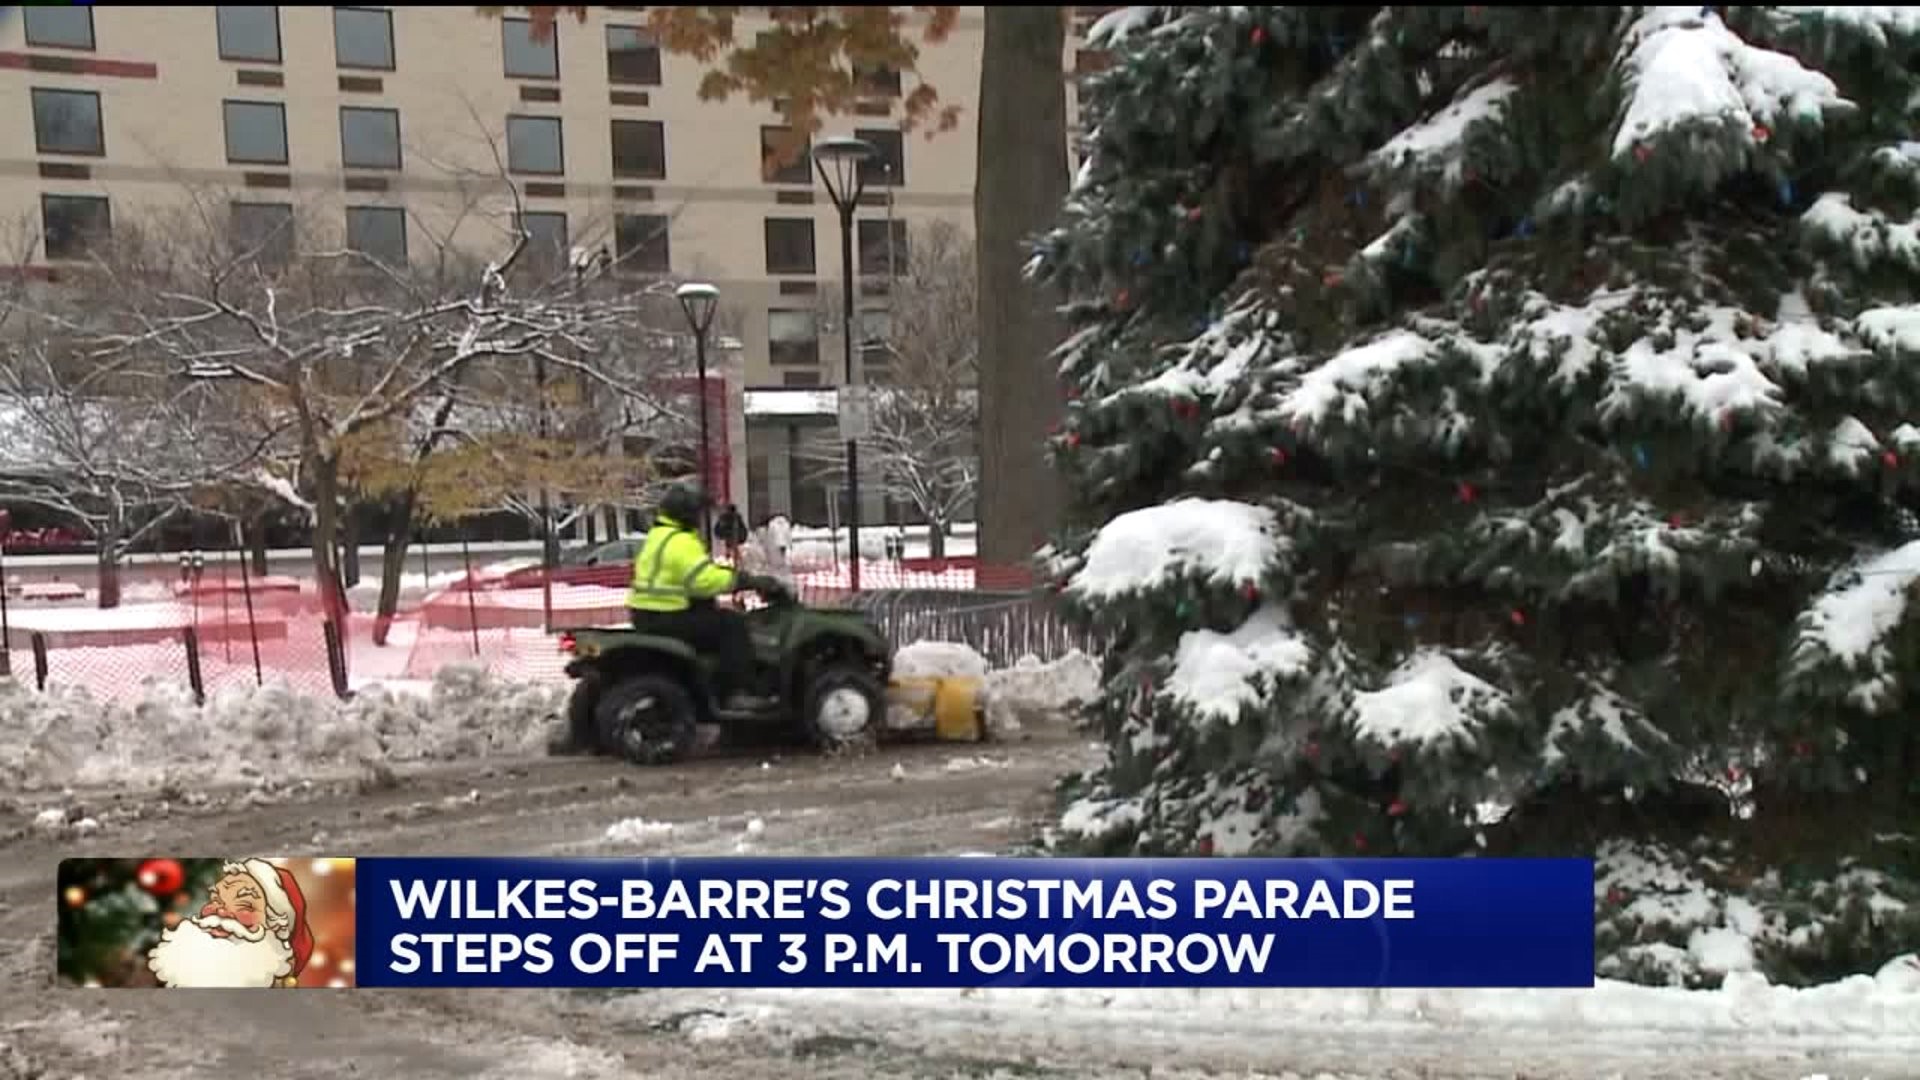 Christmas Parade in Wilkes-Barre on Track for Saturday